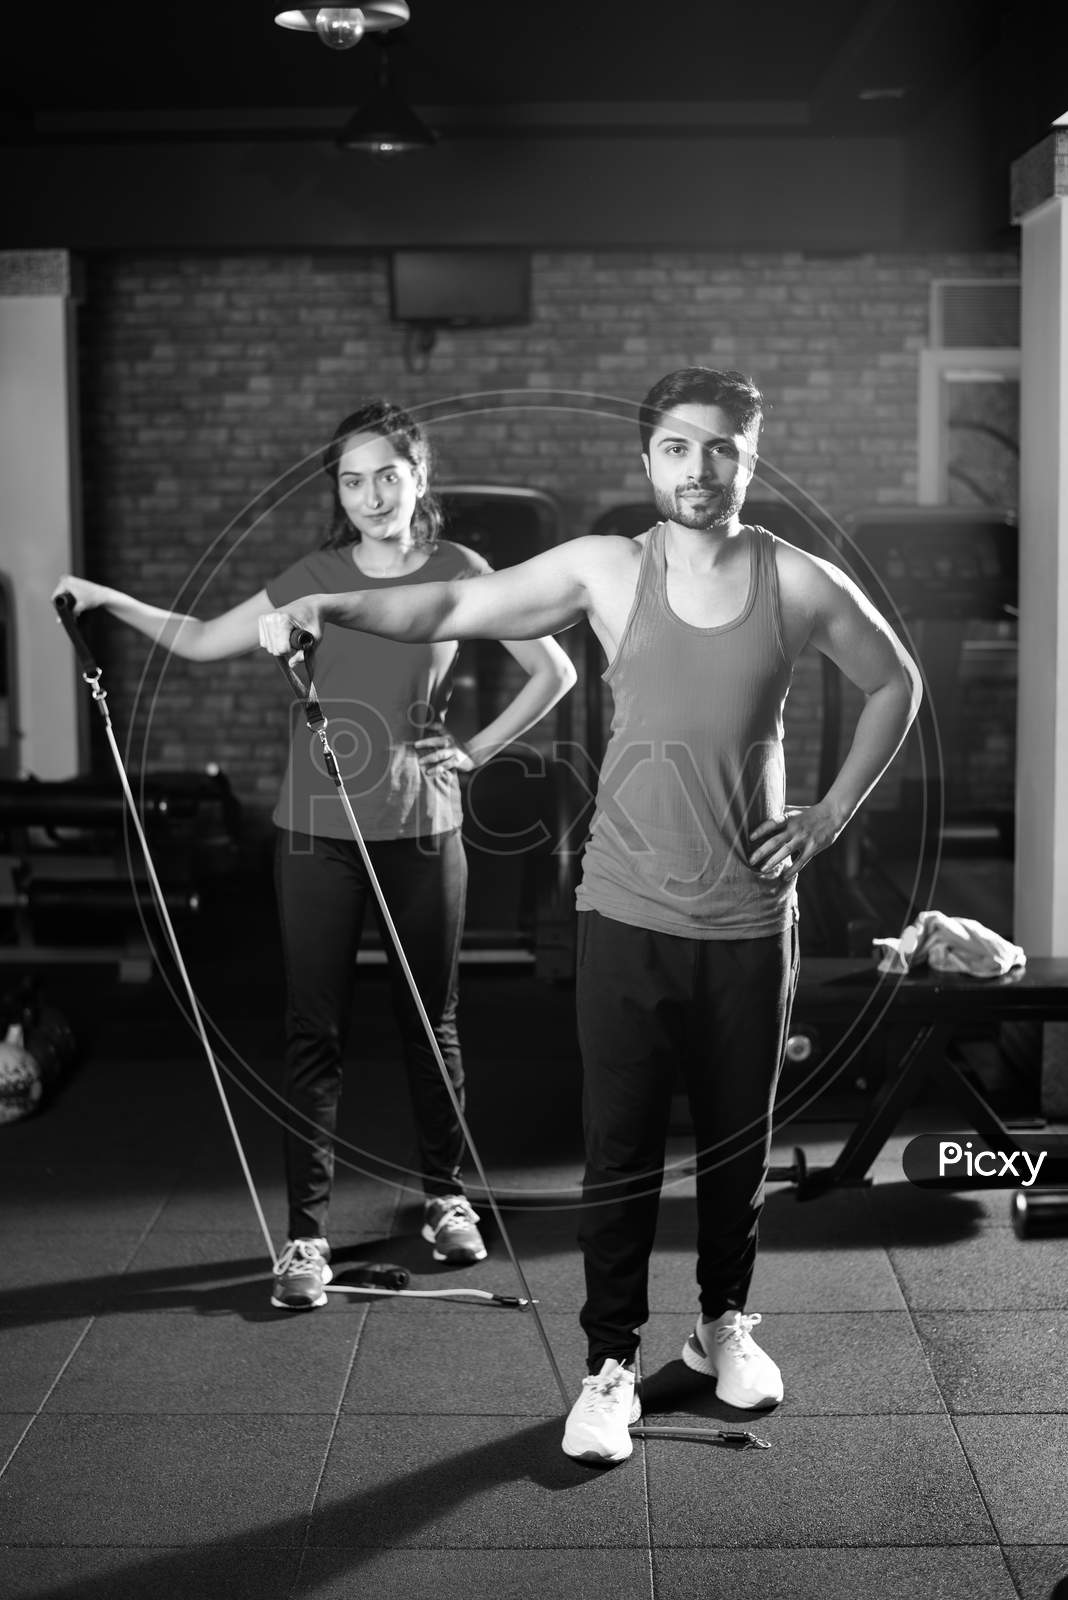 Indian Asian Young Couple Exercising In Gym With Resistance Band